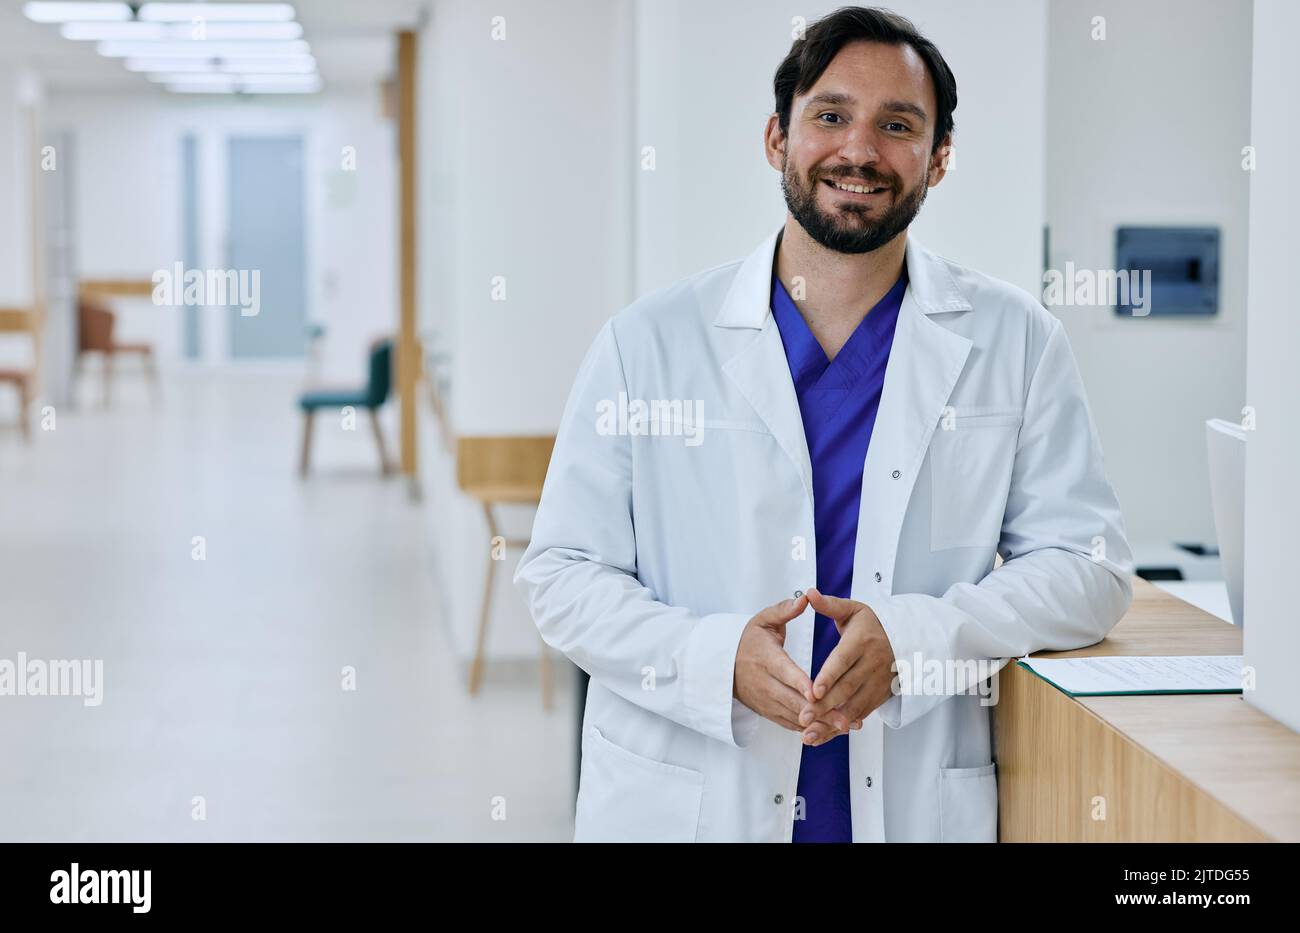 Friendly male general practitioner wearing medical uniform standing in modern medical clinic, portrait. doctor occupation Stock Photo